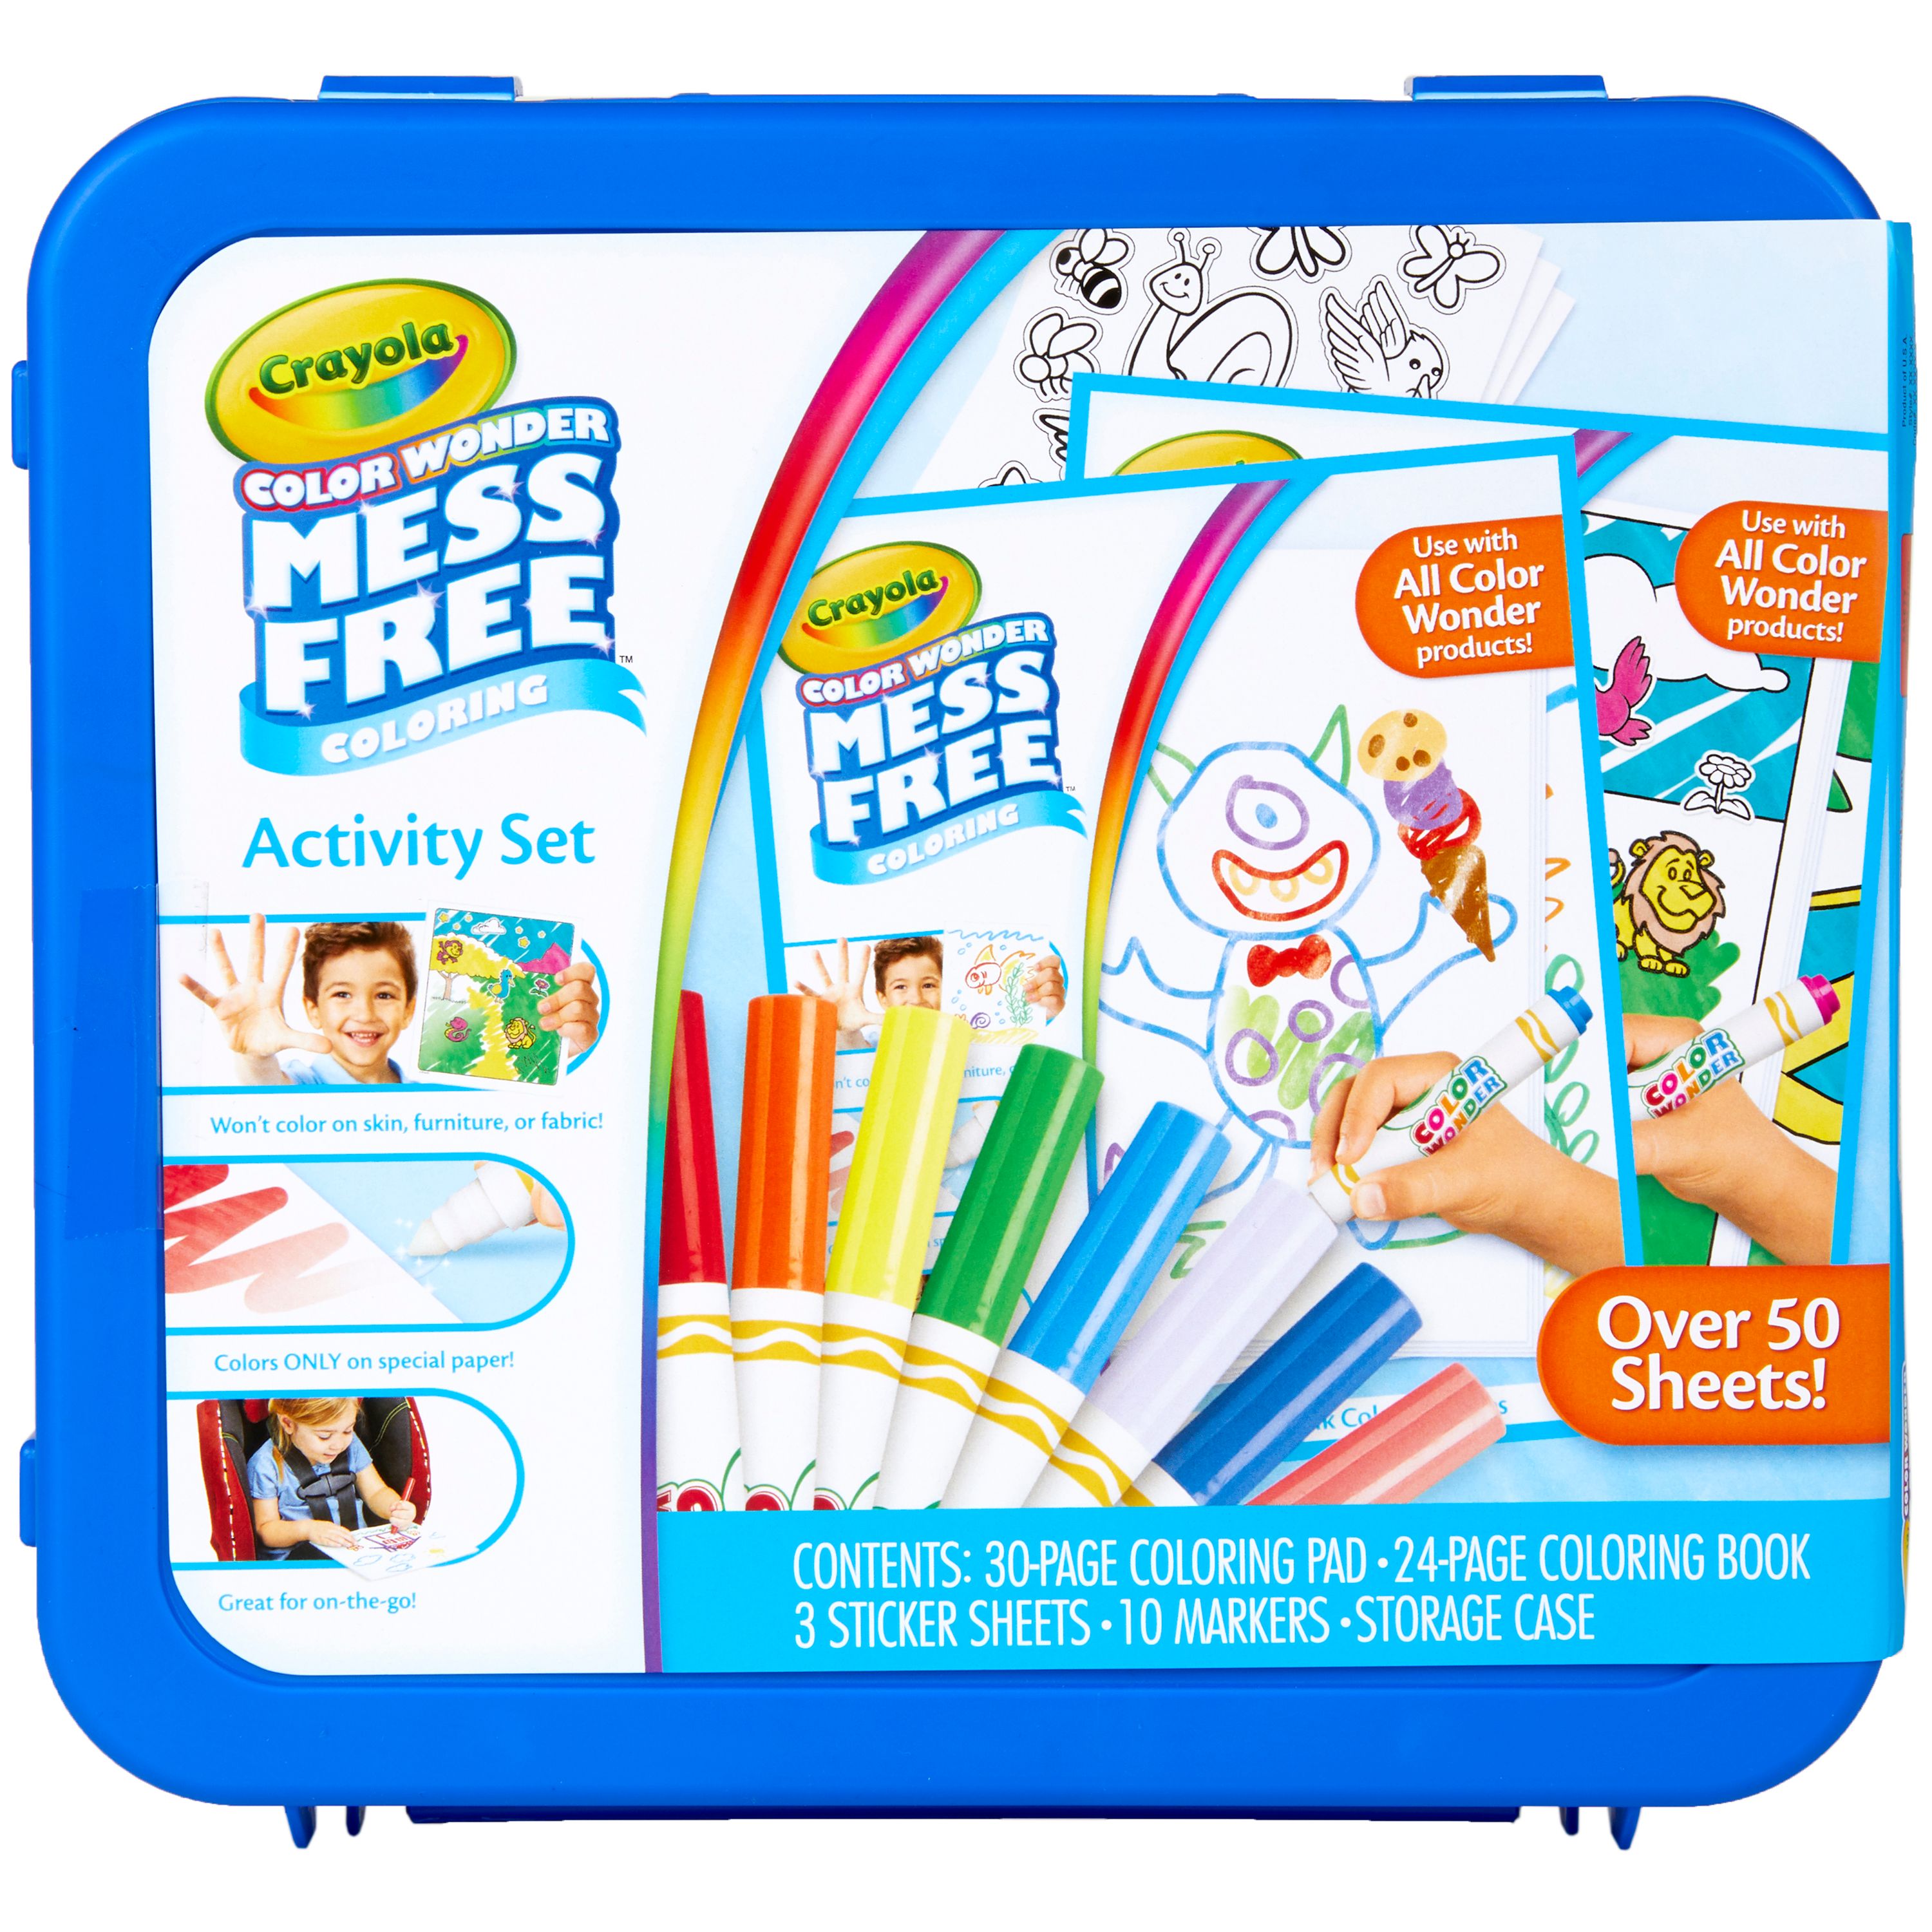 Crayola Color Wonder Mess Free Coloring Set, Beginner Child, 68 Pieces - image 5 of 8